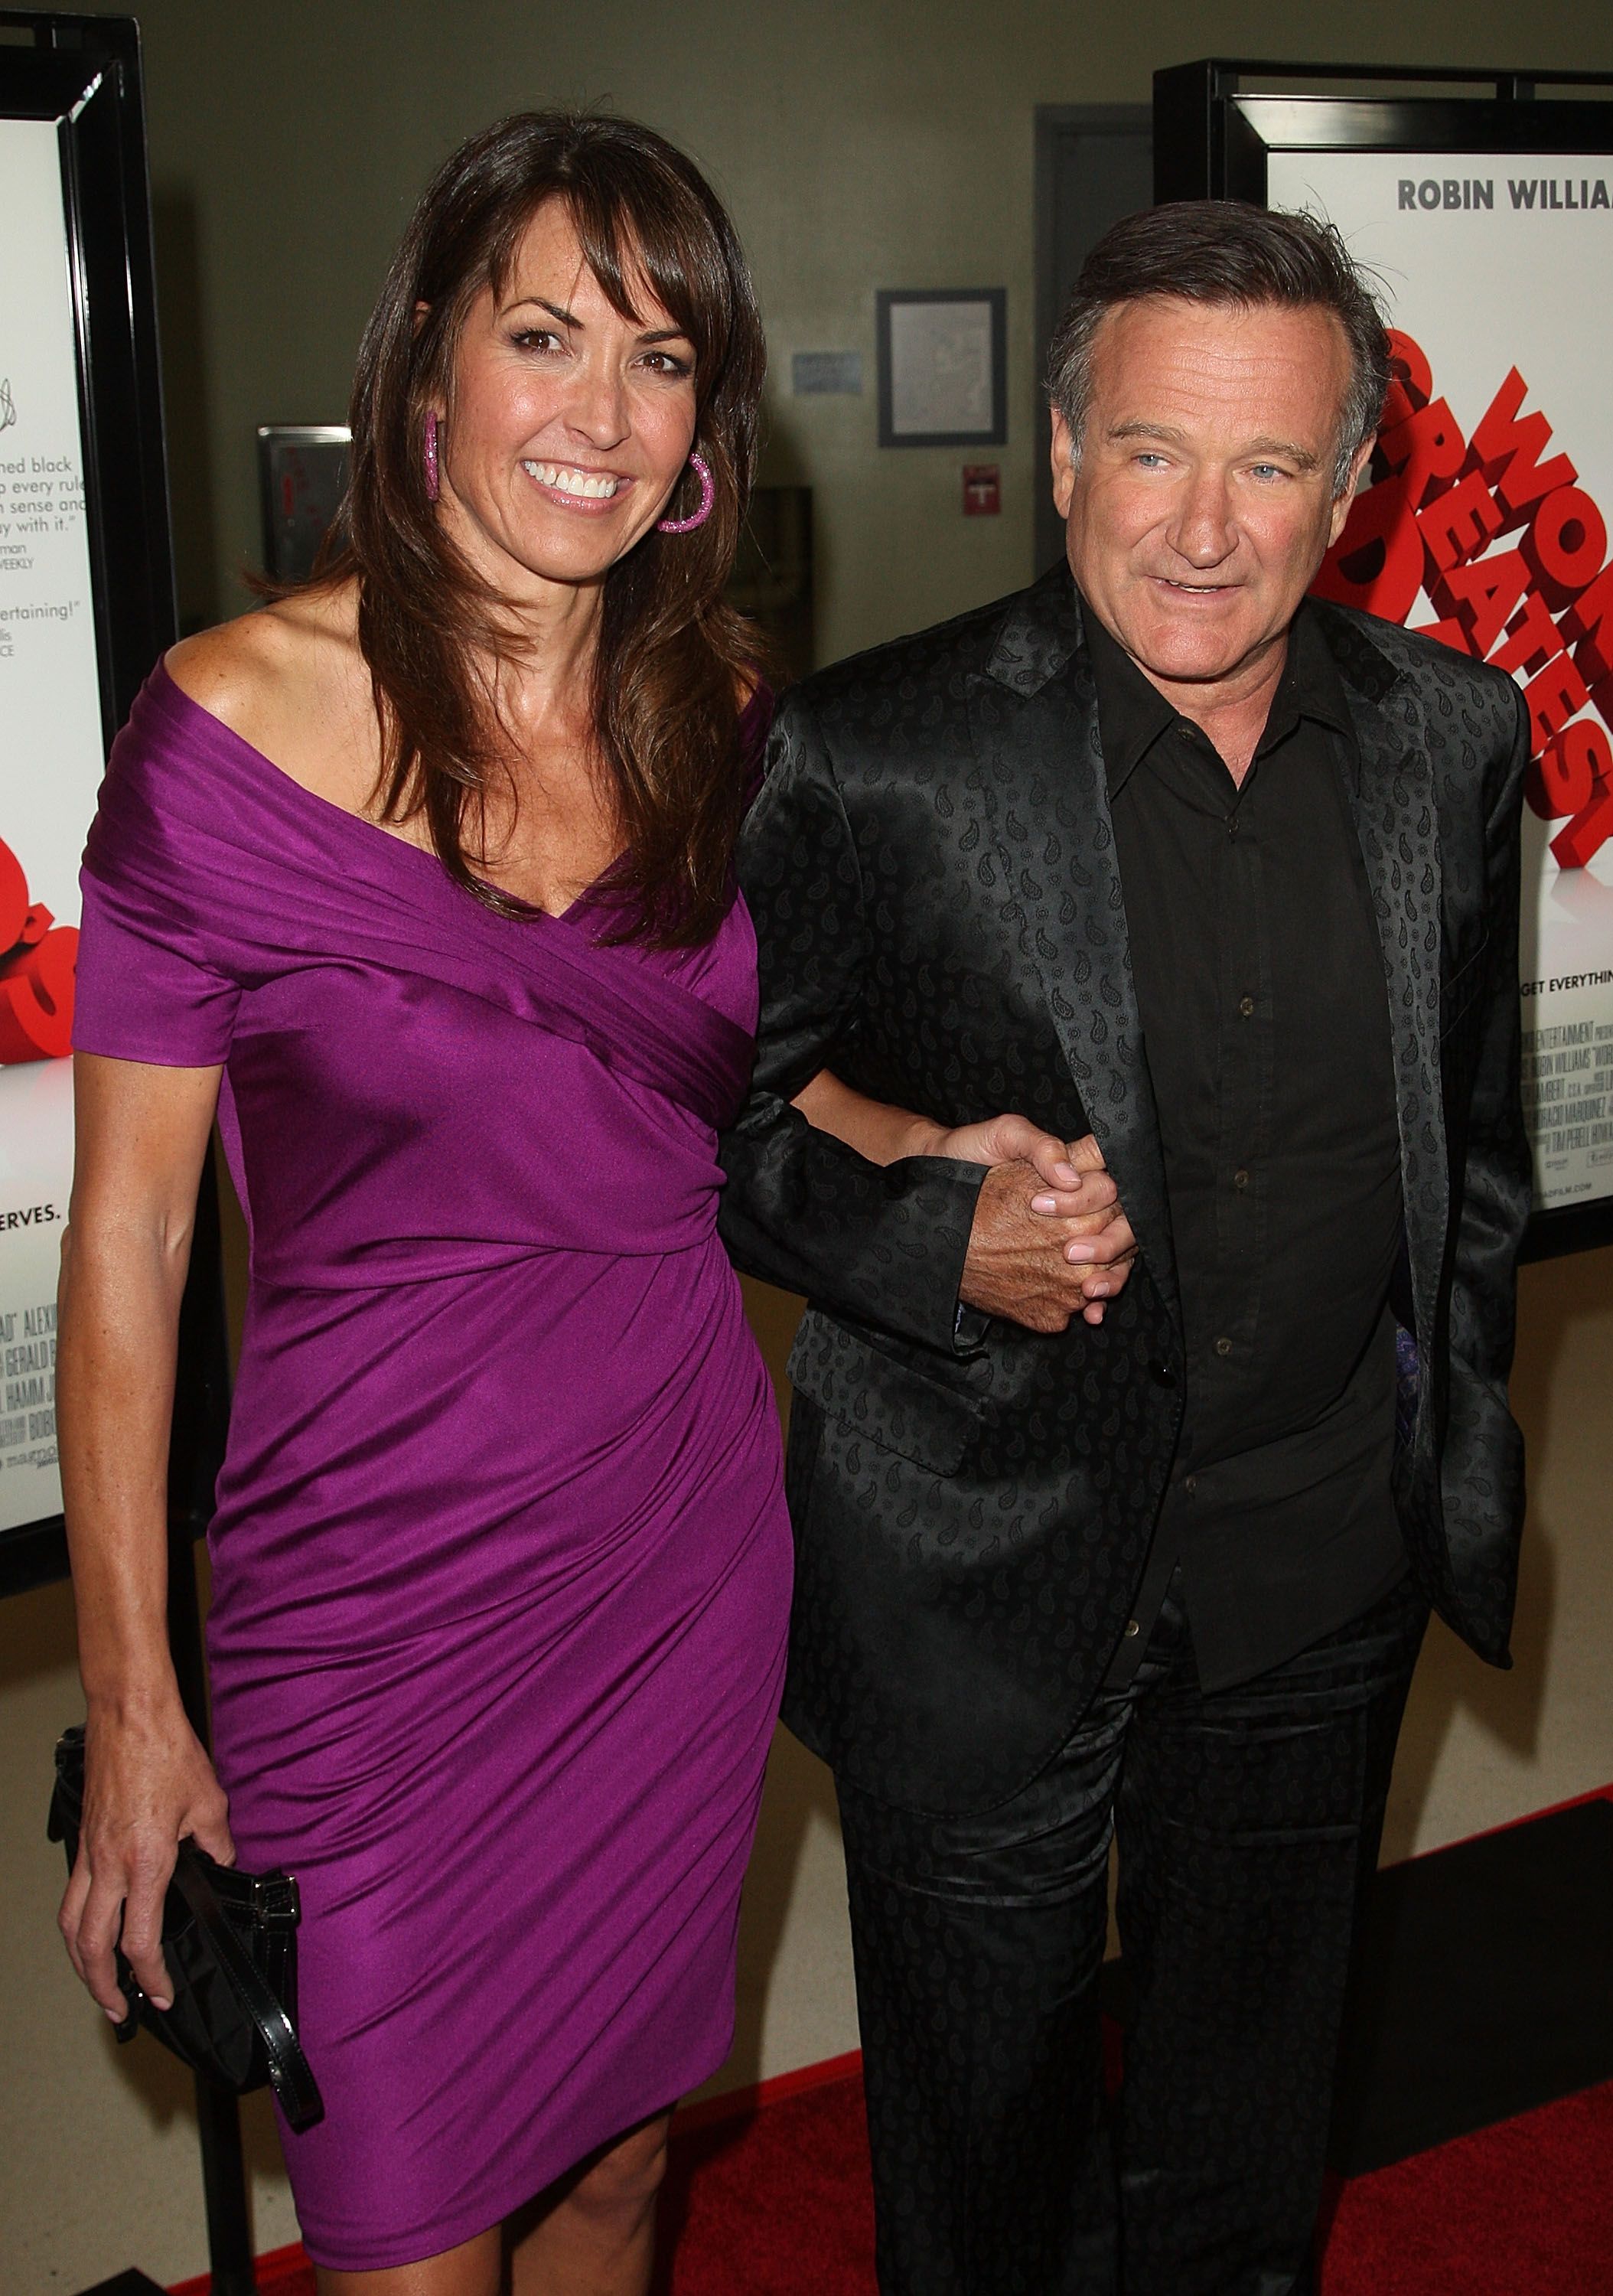 Robin Williams and Susan Schneider pose at the premiere of Magnolia Pictures' 'World's Greatest Dad' at The Landmark Theater on August 13, 2009 | Photo: Getty Images